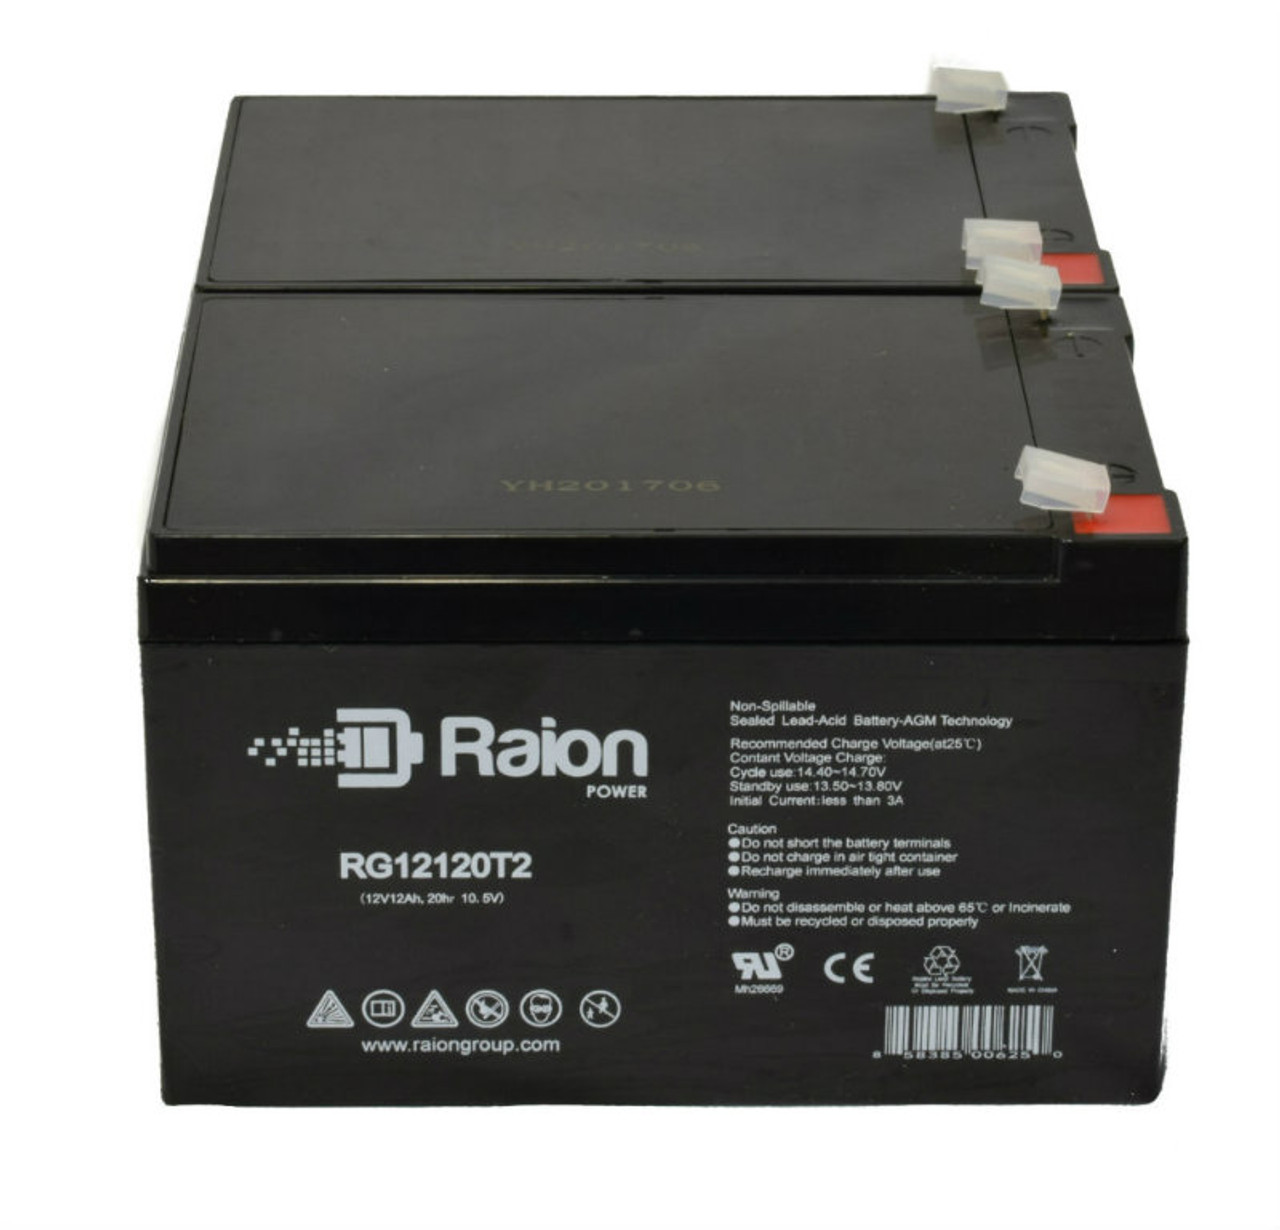 Raion Power 12V 12Ah Non-Spillable Compatible Replacement Battery for Weiboer GB12-12 - (2 Pack)